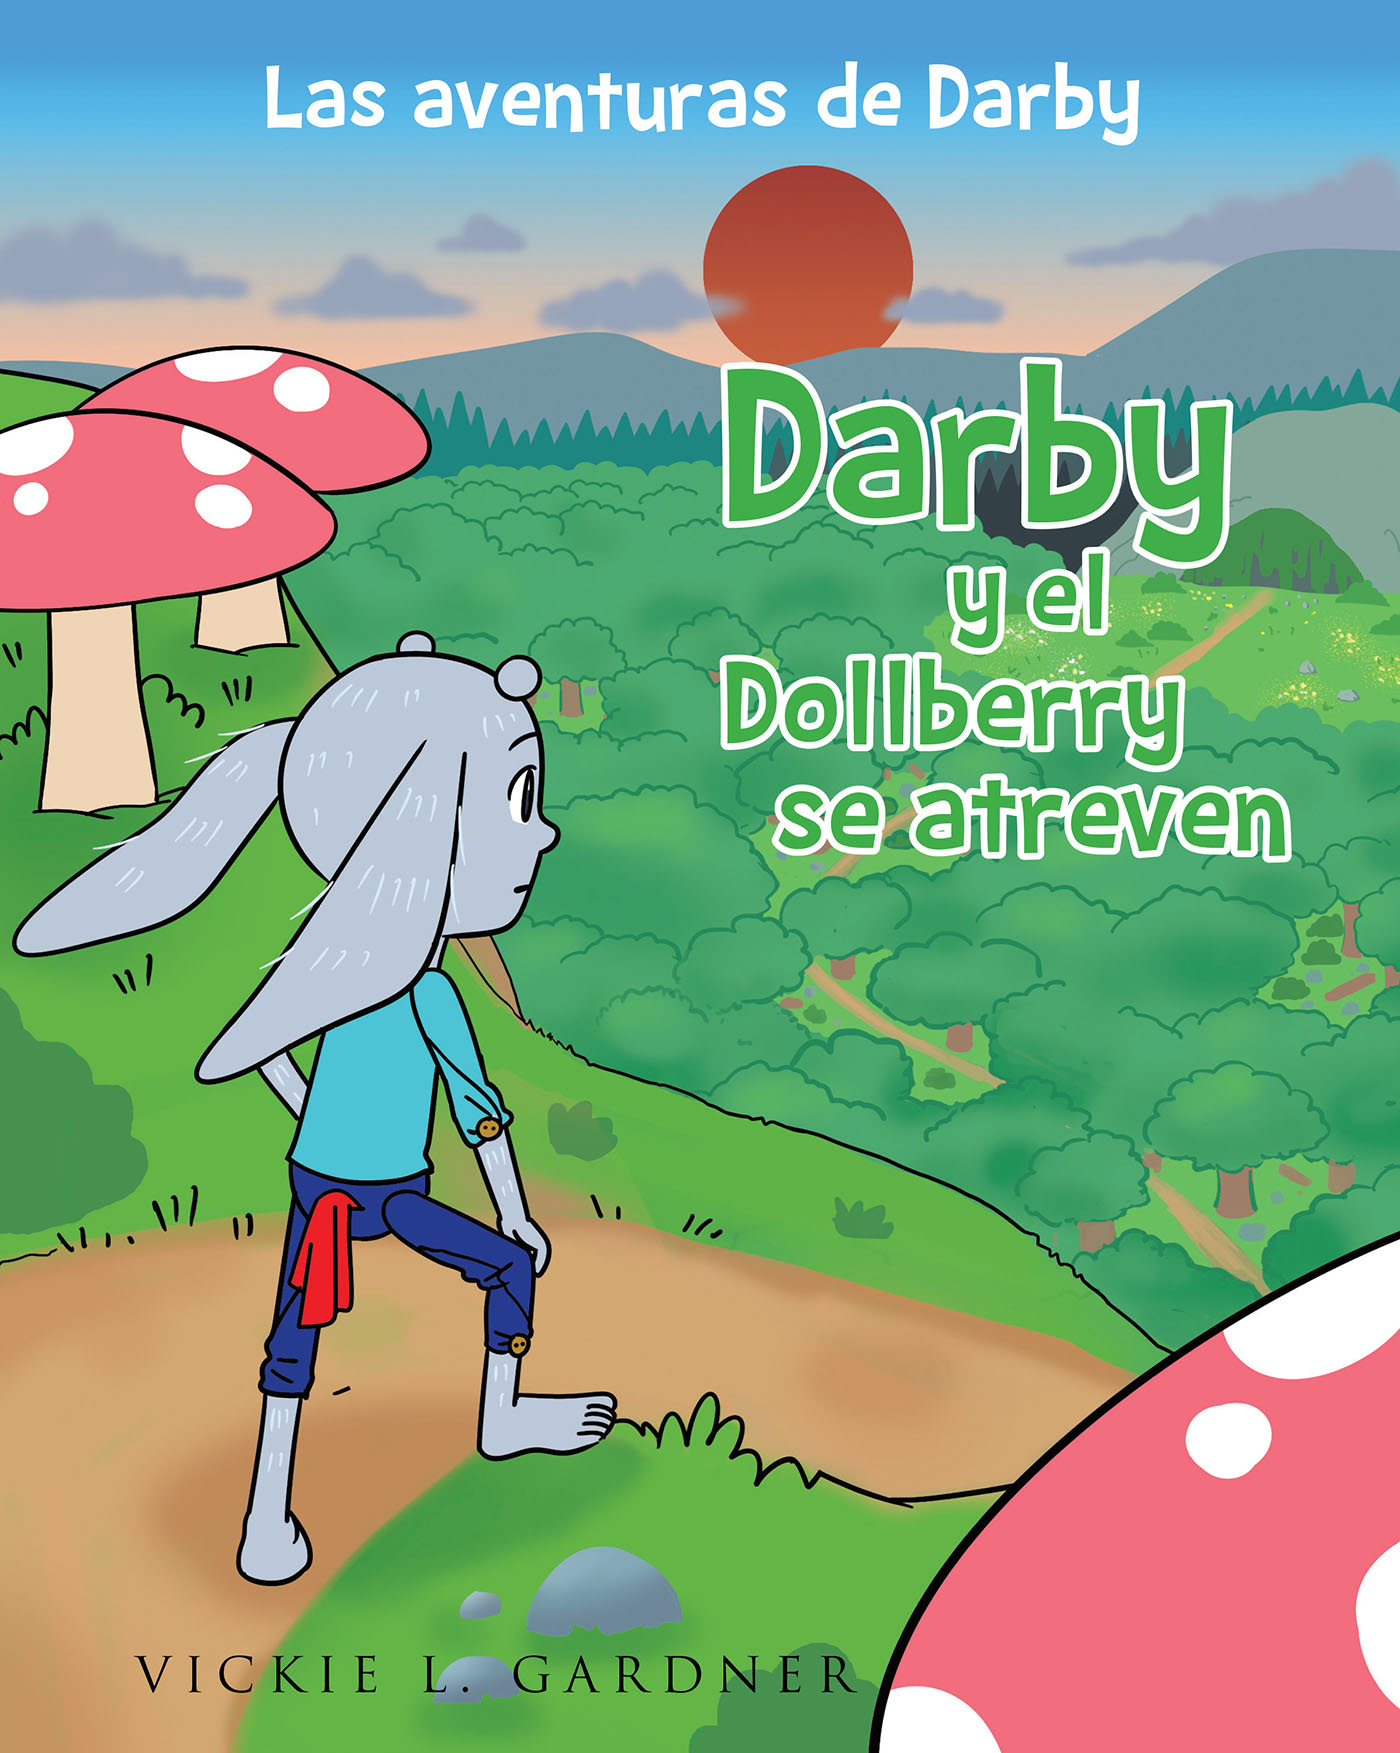 Author Vickie Gardner’s New Book, “Darby y el Dollberry se atreven,” Follows a Young M’ite on an Adventure Into the B’lack Forest and Deep Into the Cave of the Haunted